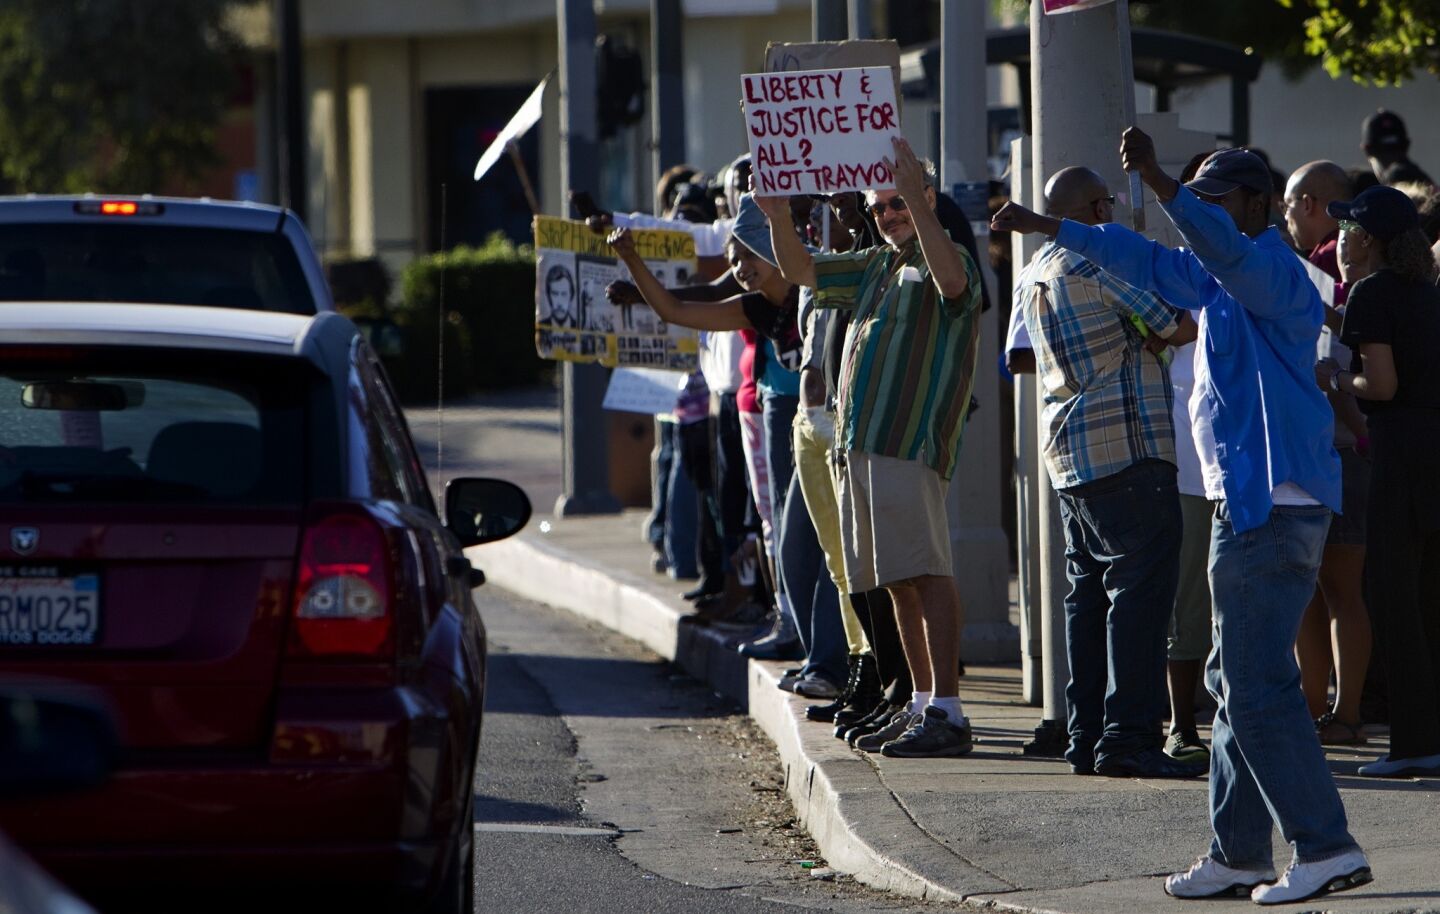 On Tuesday, Protesters rally for the third day on Crenshaw Boulevard in Leimert Park.